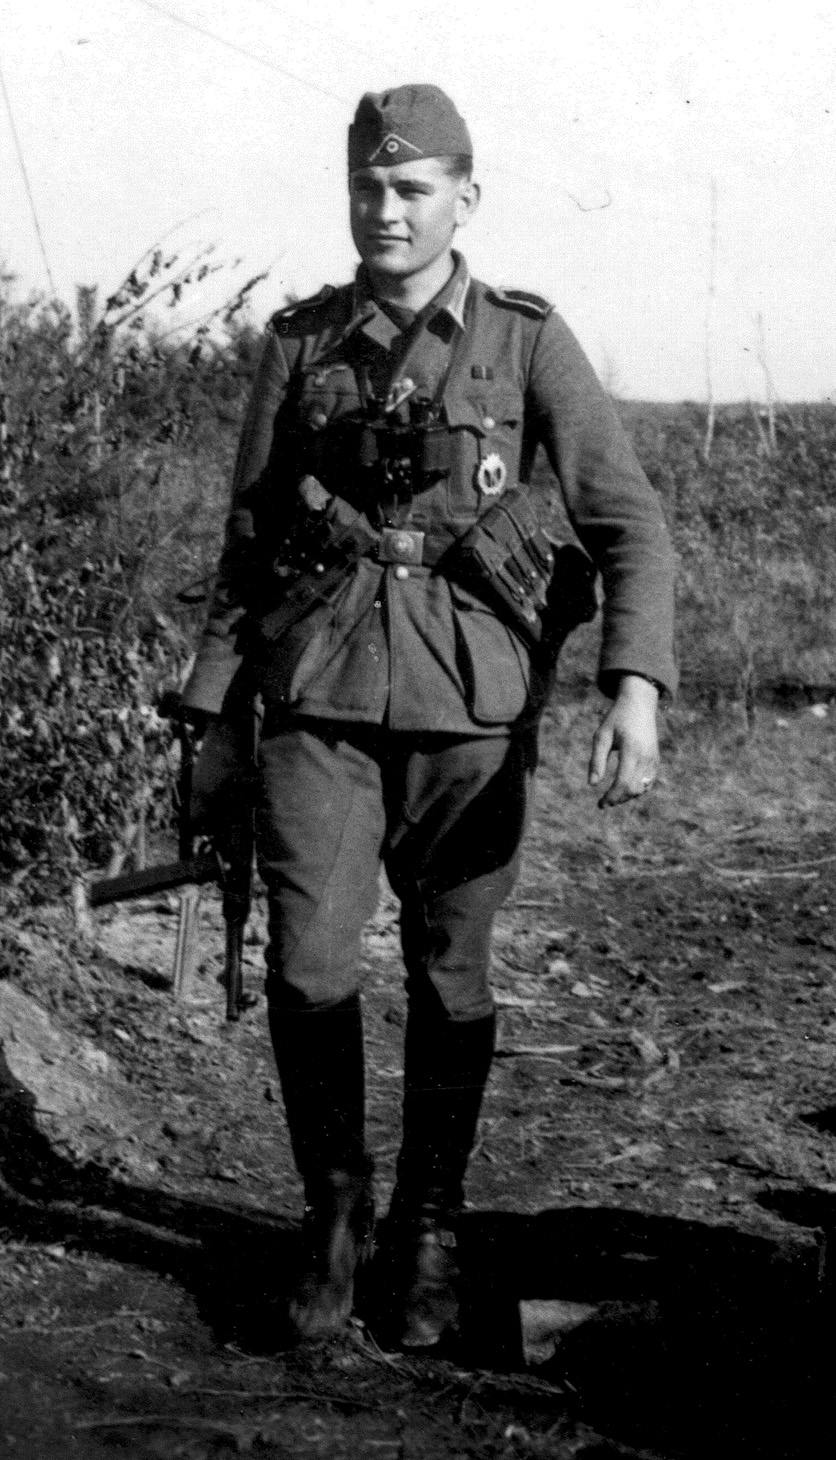 Lubbeck, a private first class and forward observer for his company’s howitzers in 1942, walks the front lines with an MP-40. He is wearing the infantry assault badge and has the ribbon denoting the Iron Cross in his buttonhole.